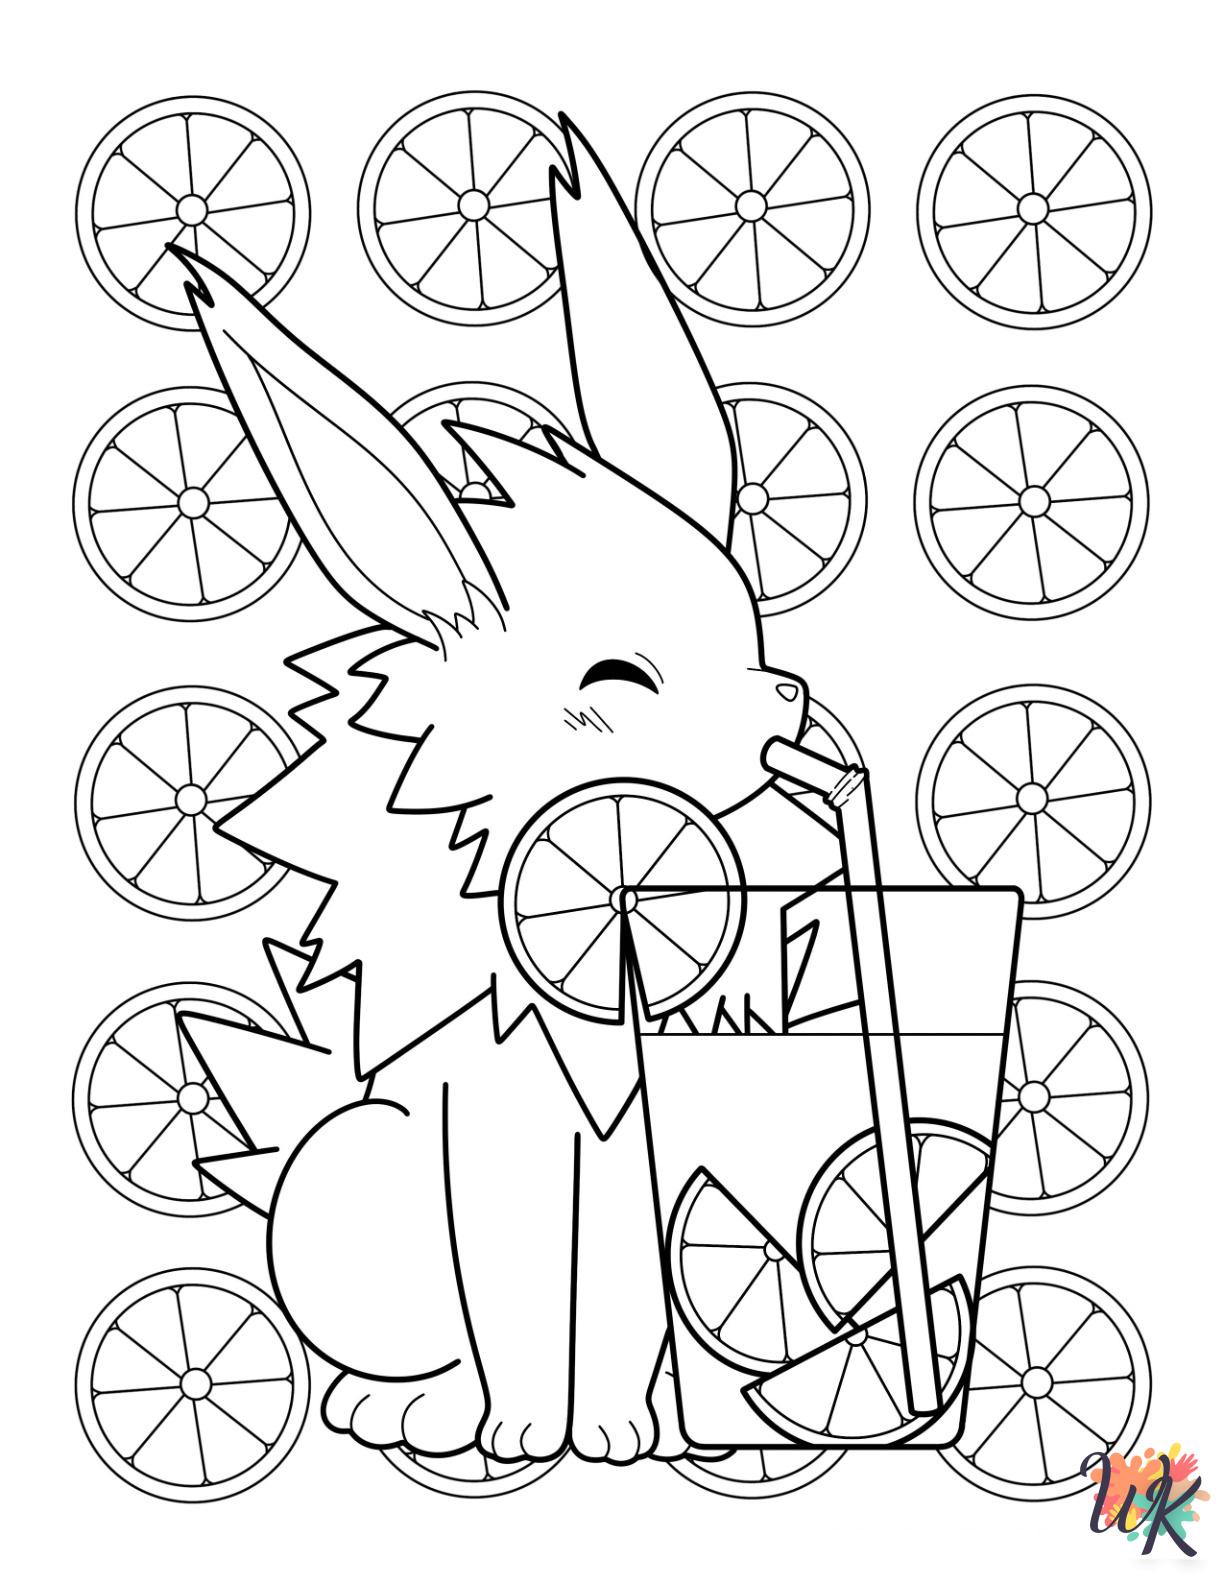 Jolteon coloring pages free